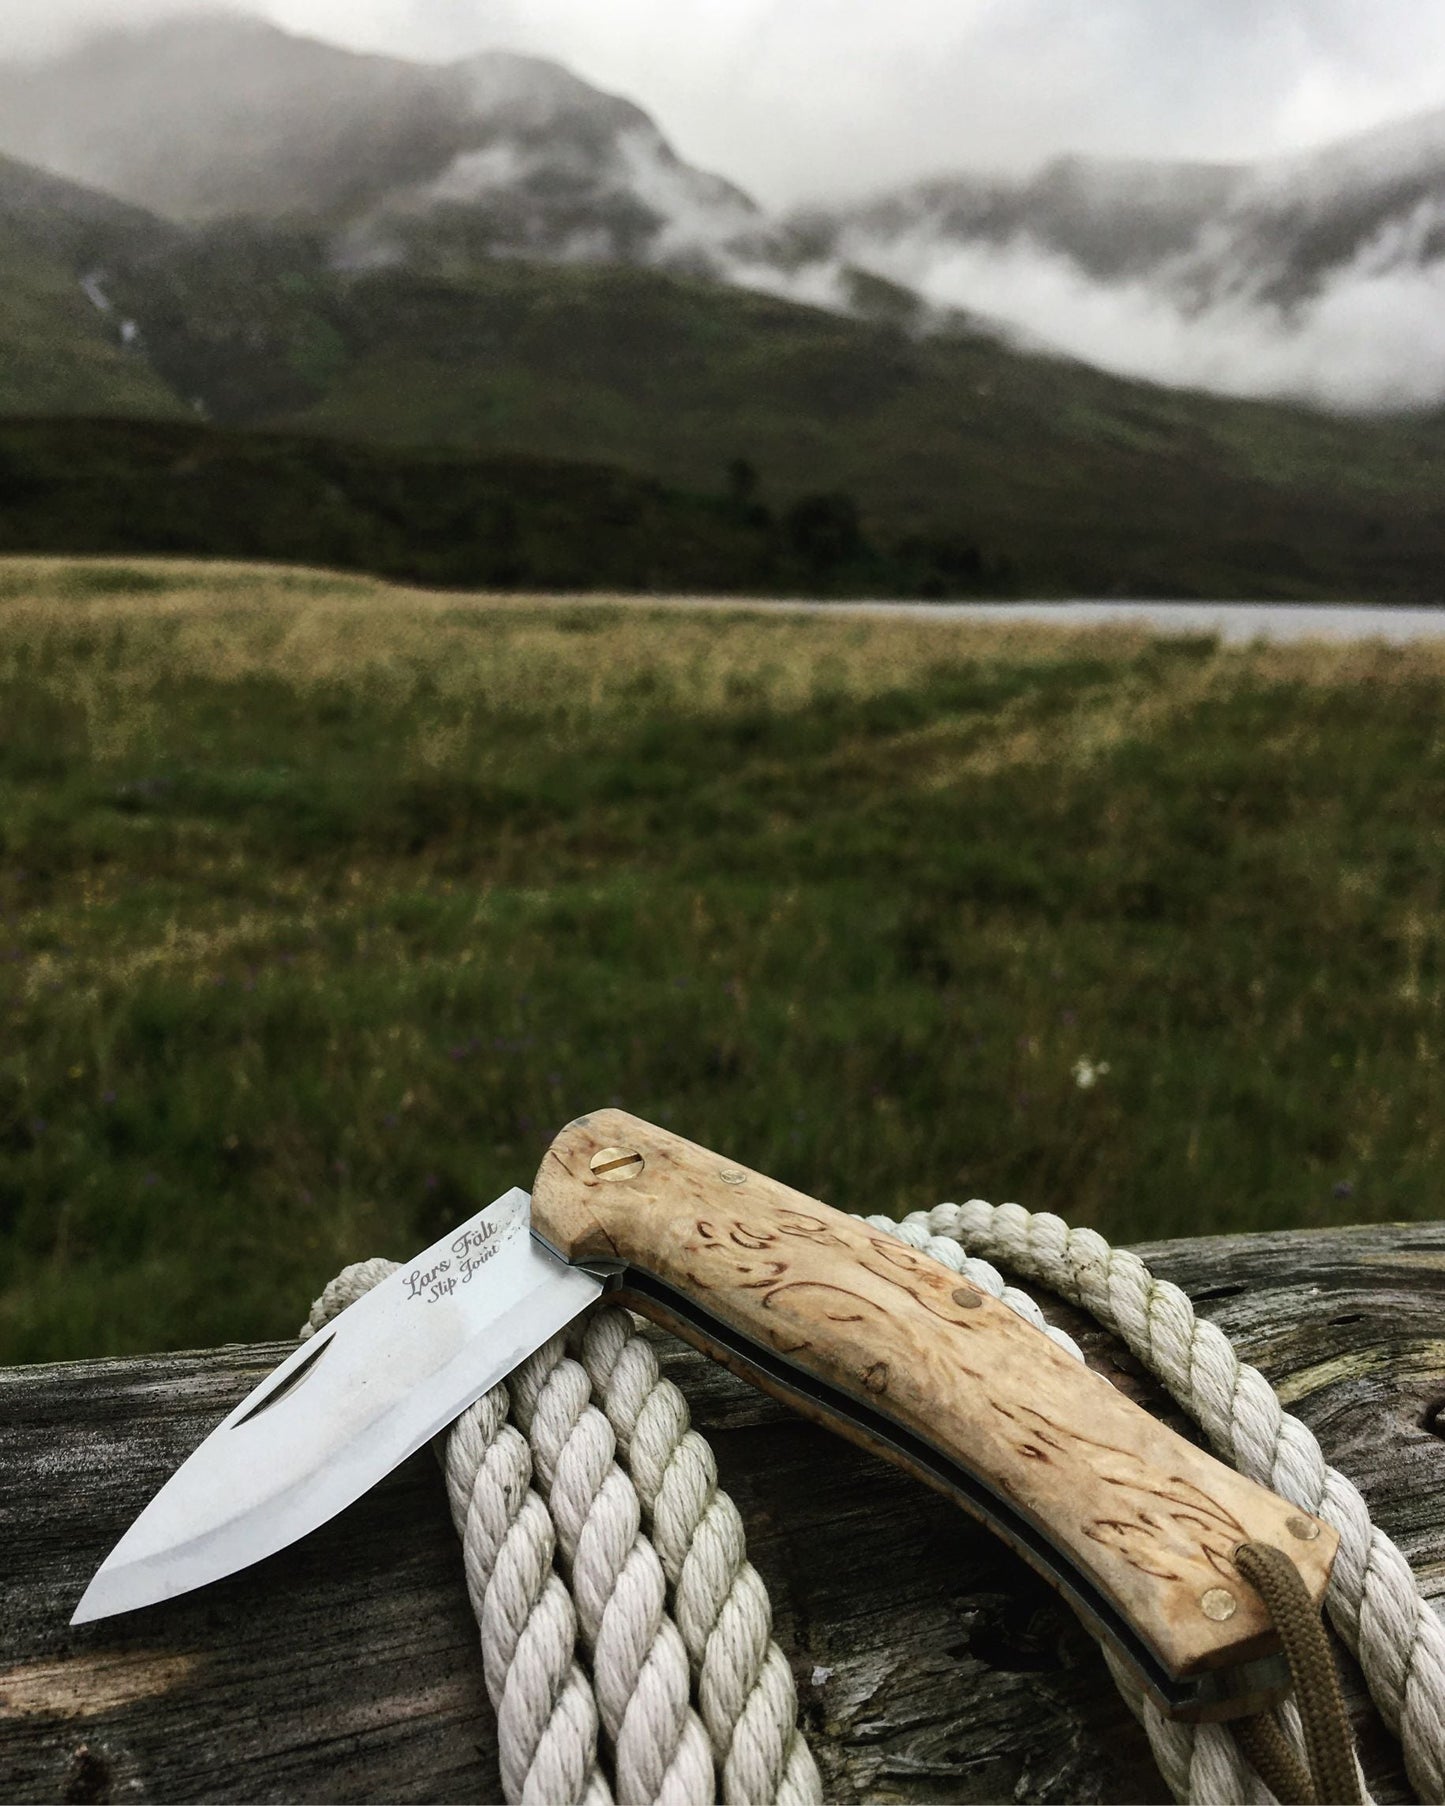 UK-legal folding knife, stainless steel blade, curly birch handle,, made by Casstrom Sweden. Knife is laid on a log in the foreground and has hills in the background